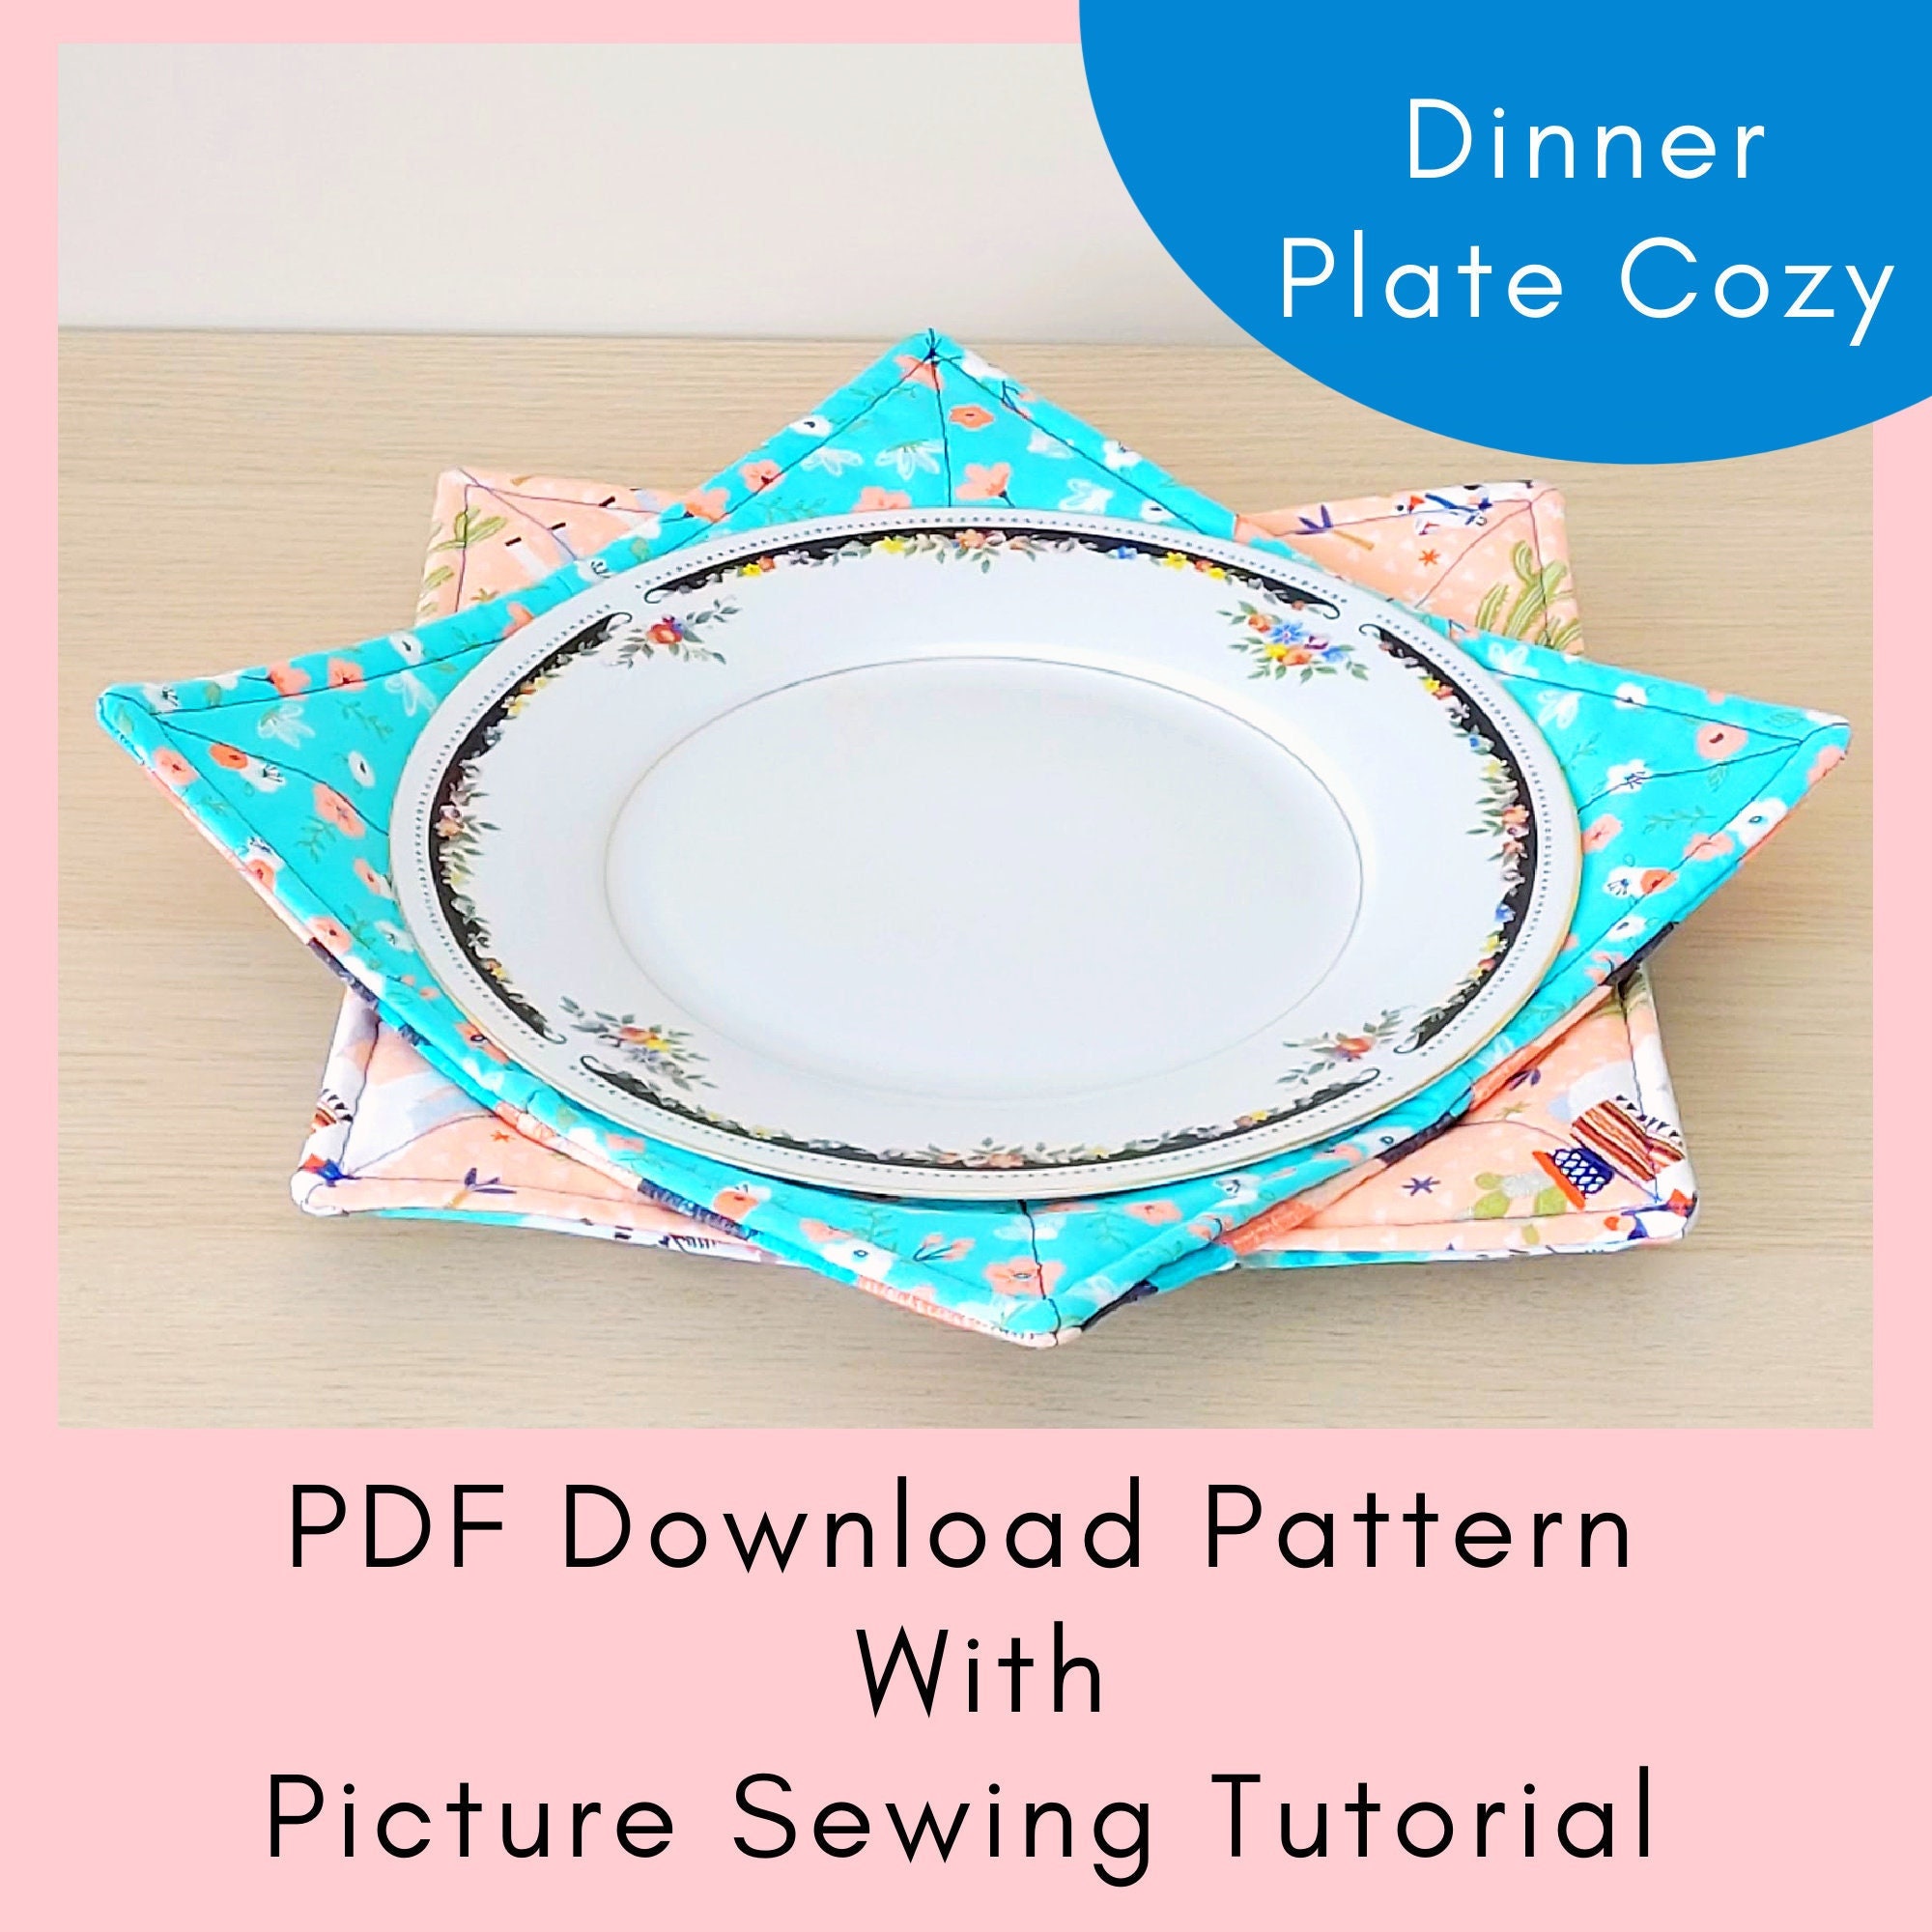 reversible-dinner-plate-cozy-printable-sewing-pattern-and-etsy-australia